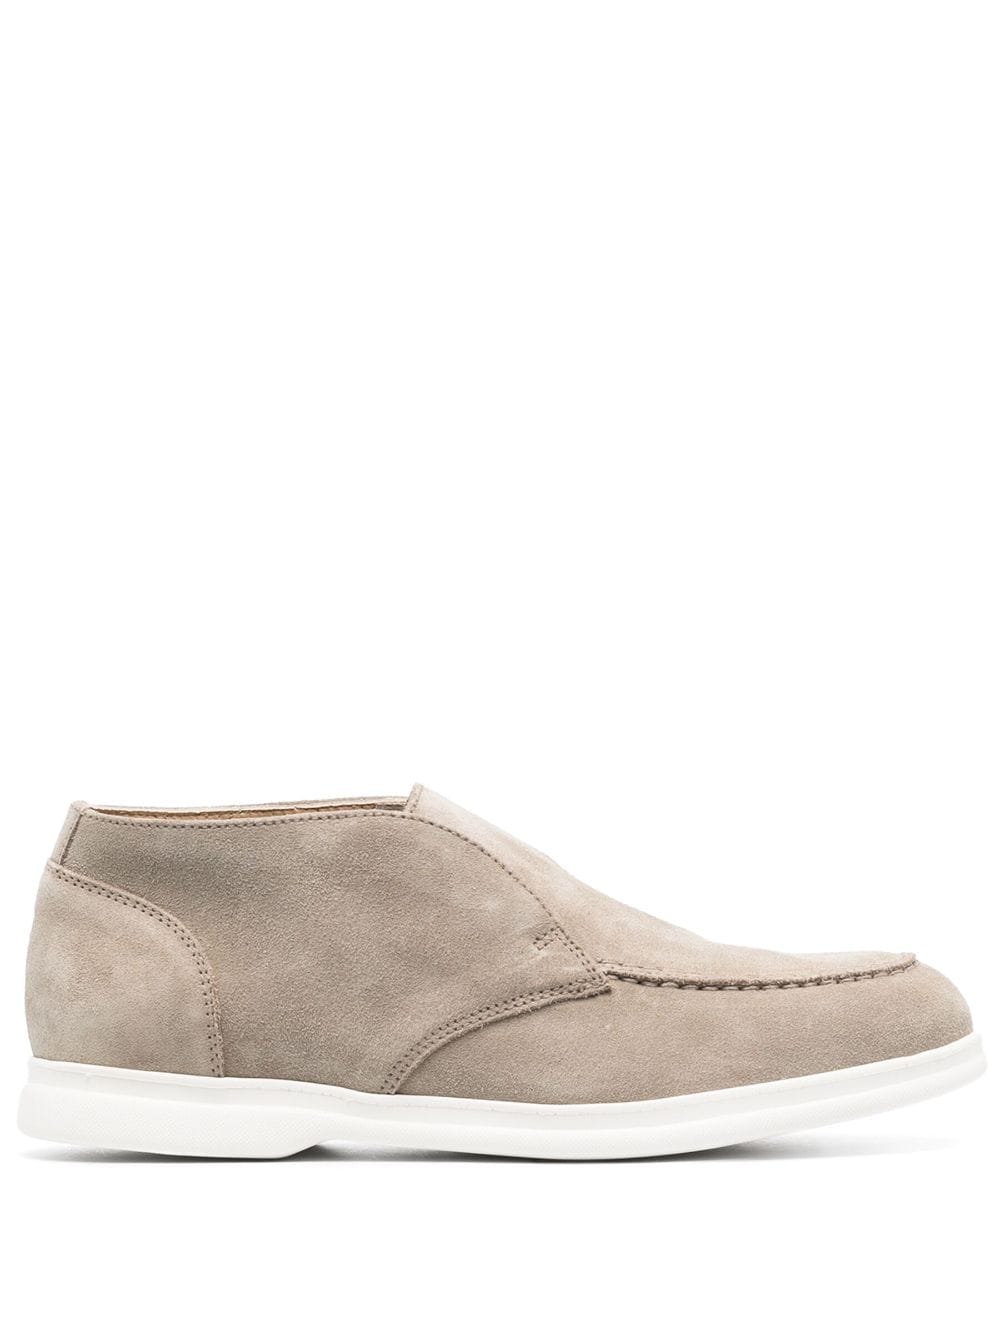 Doucal's ankle-length suede loafers - Neutrals von Doucal's